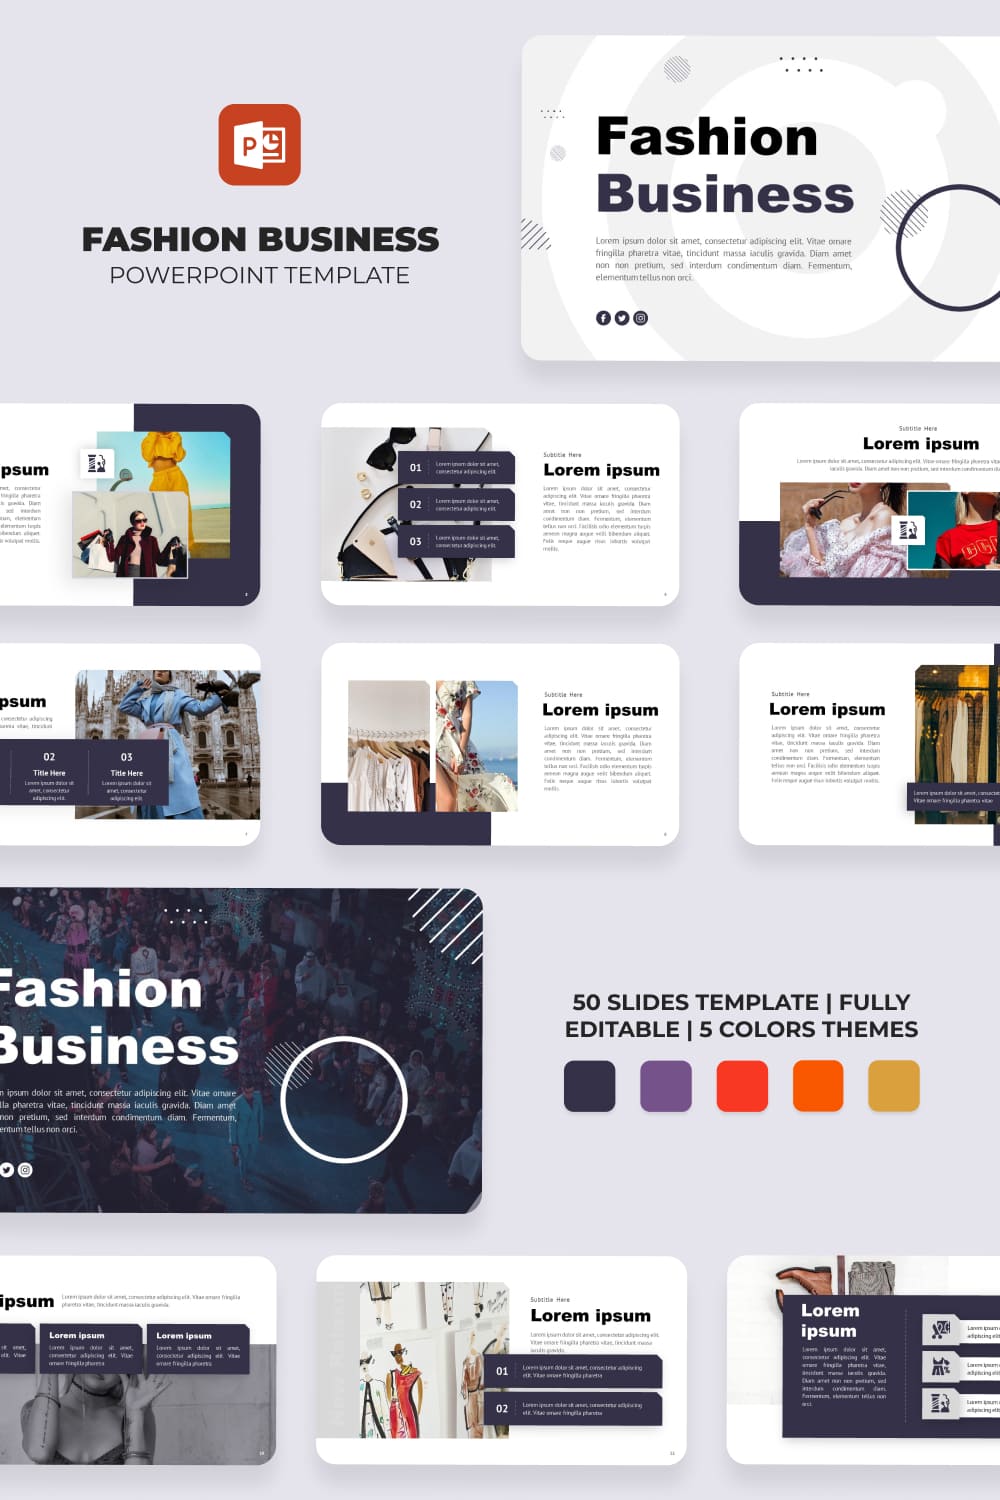 Fashion Business Powerpoint Template.